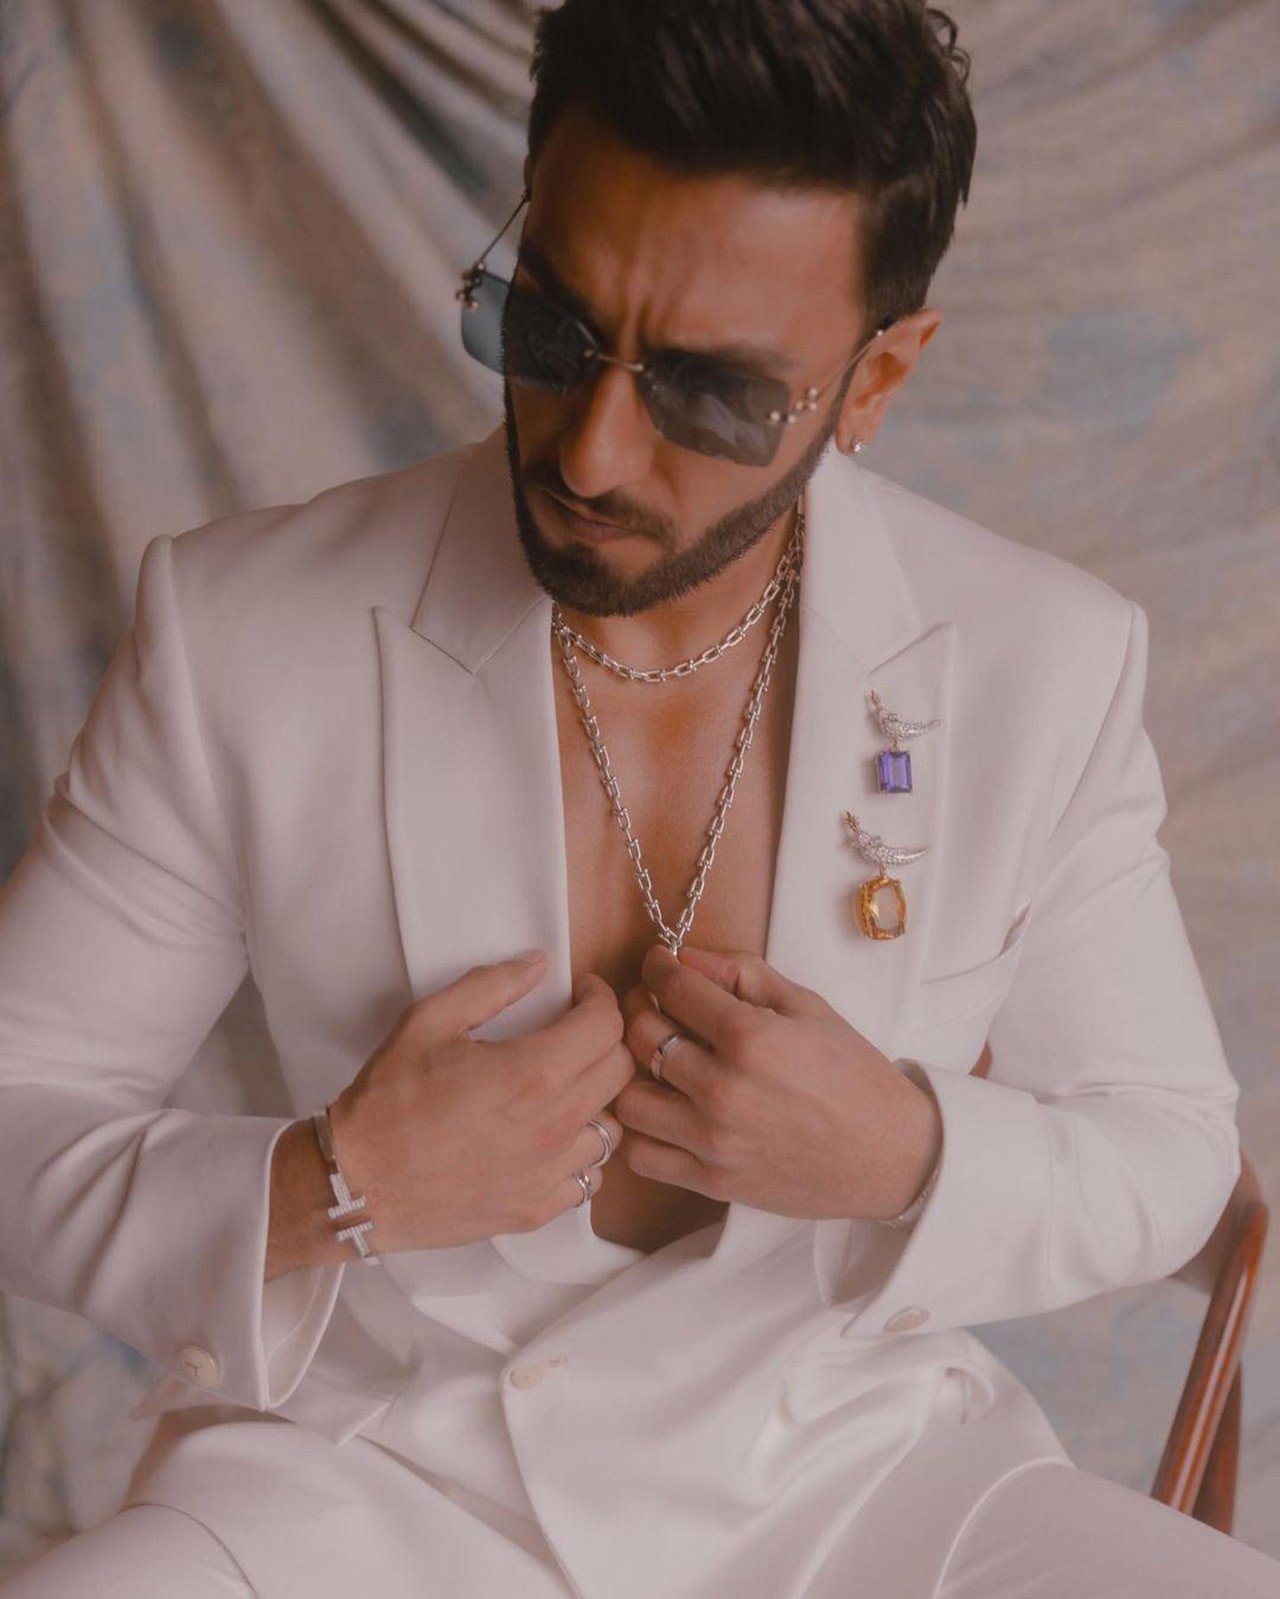 Ranveer Singh makes his swoon looking dapper in white tuxedo for